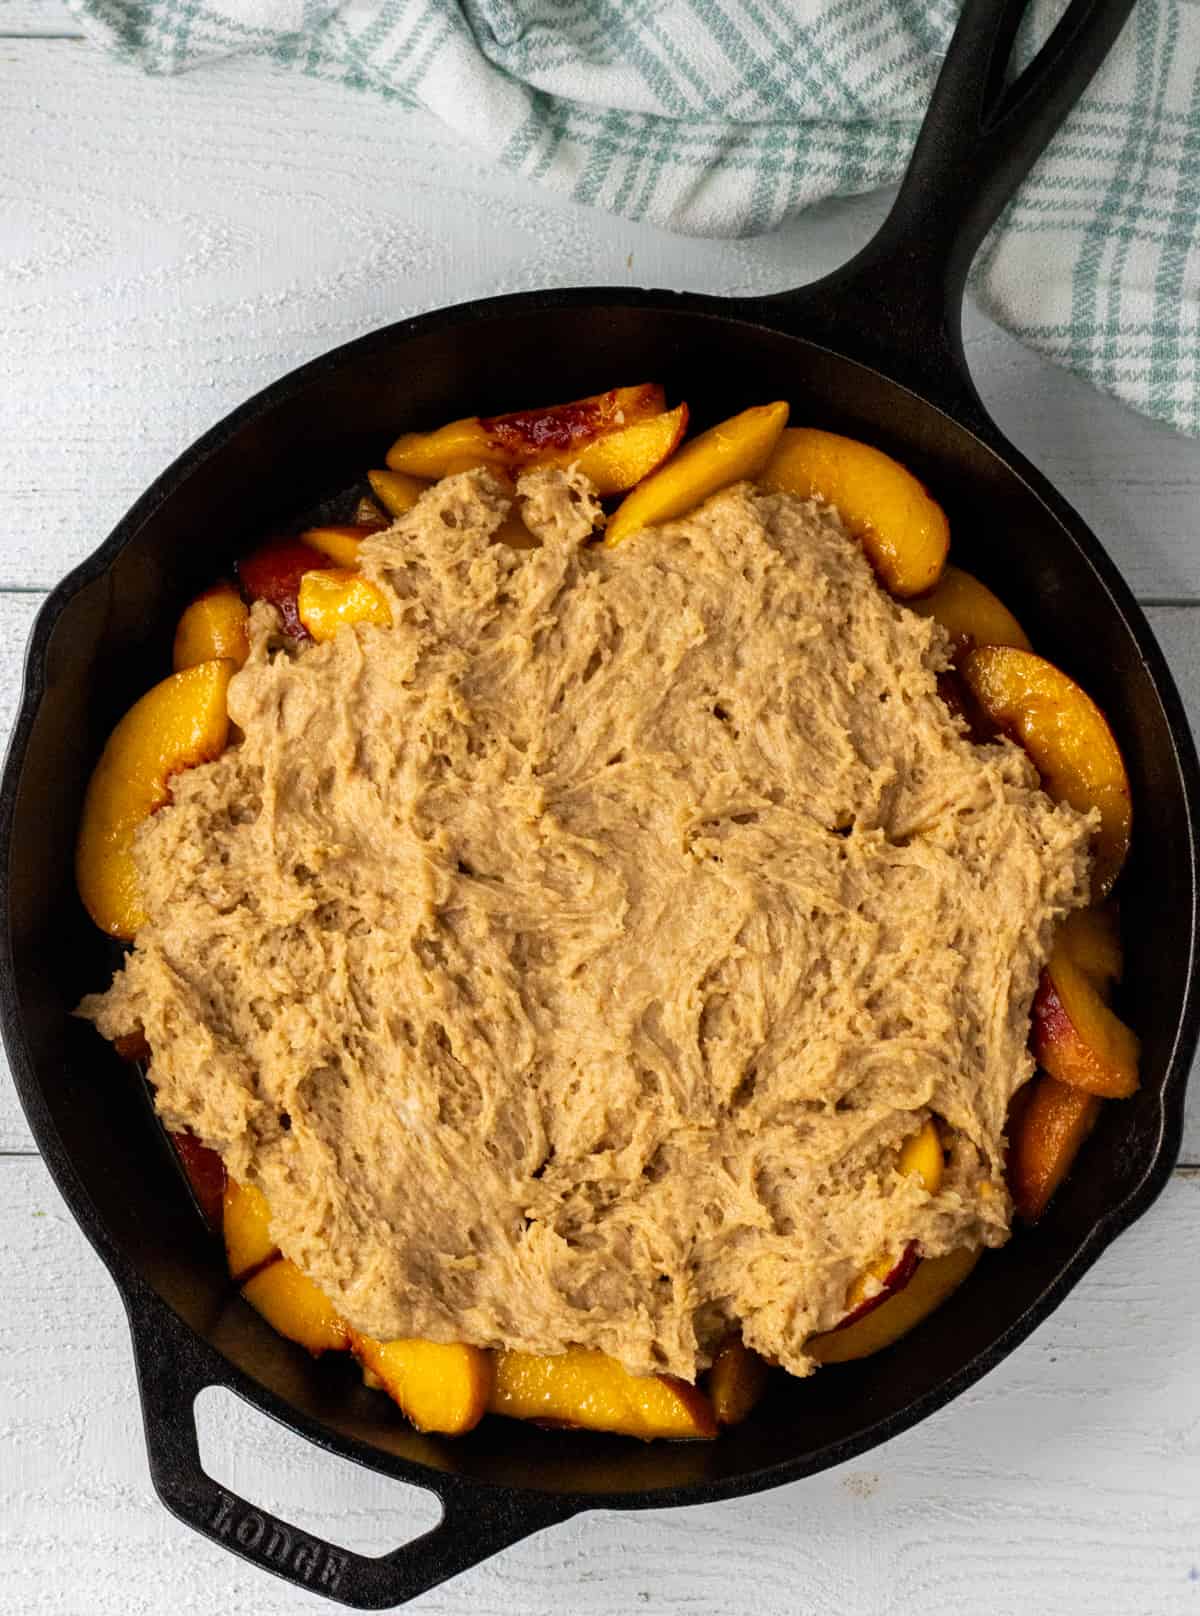 Unbaked peach cobbler in a cast iron pan.